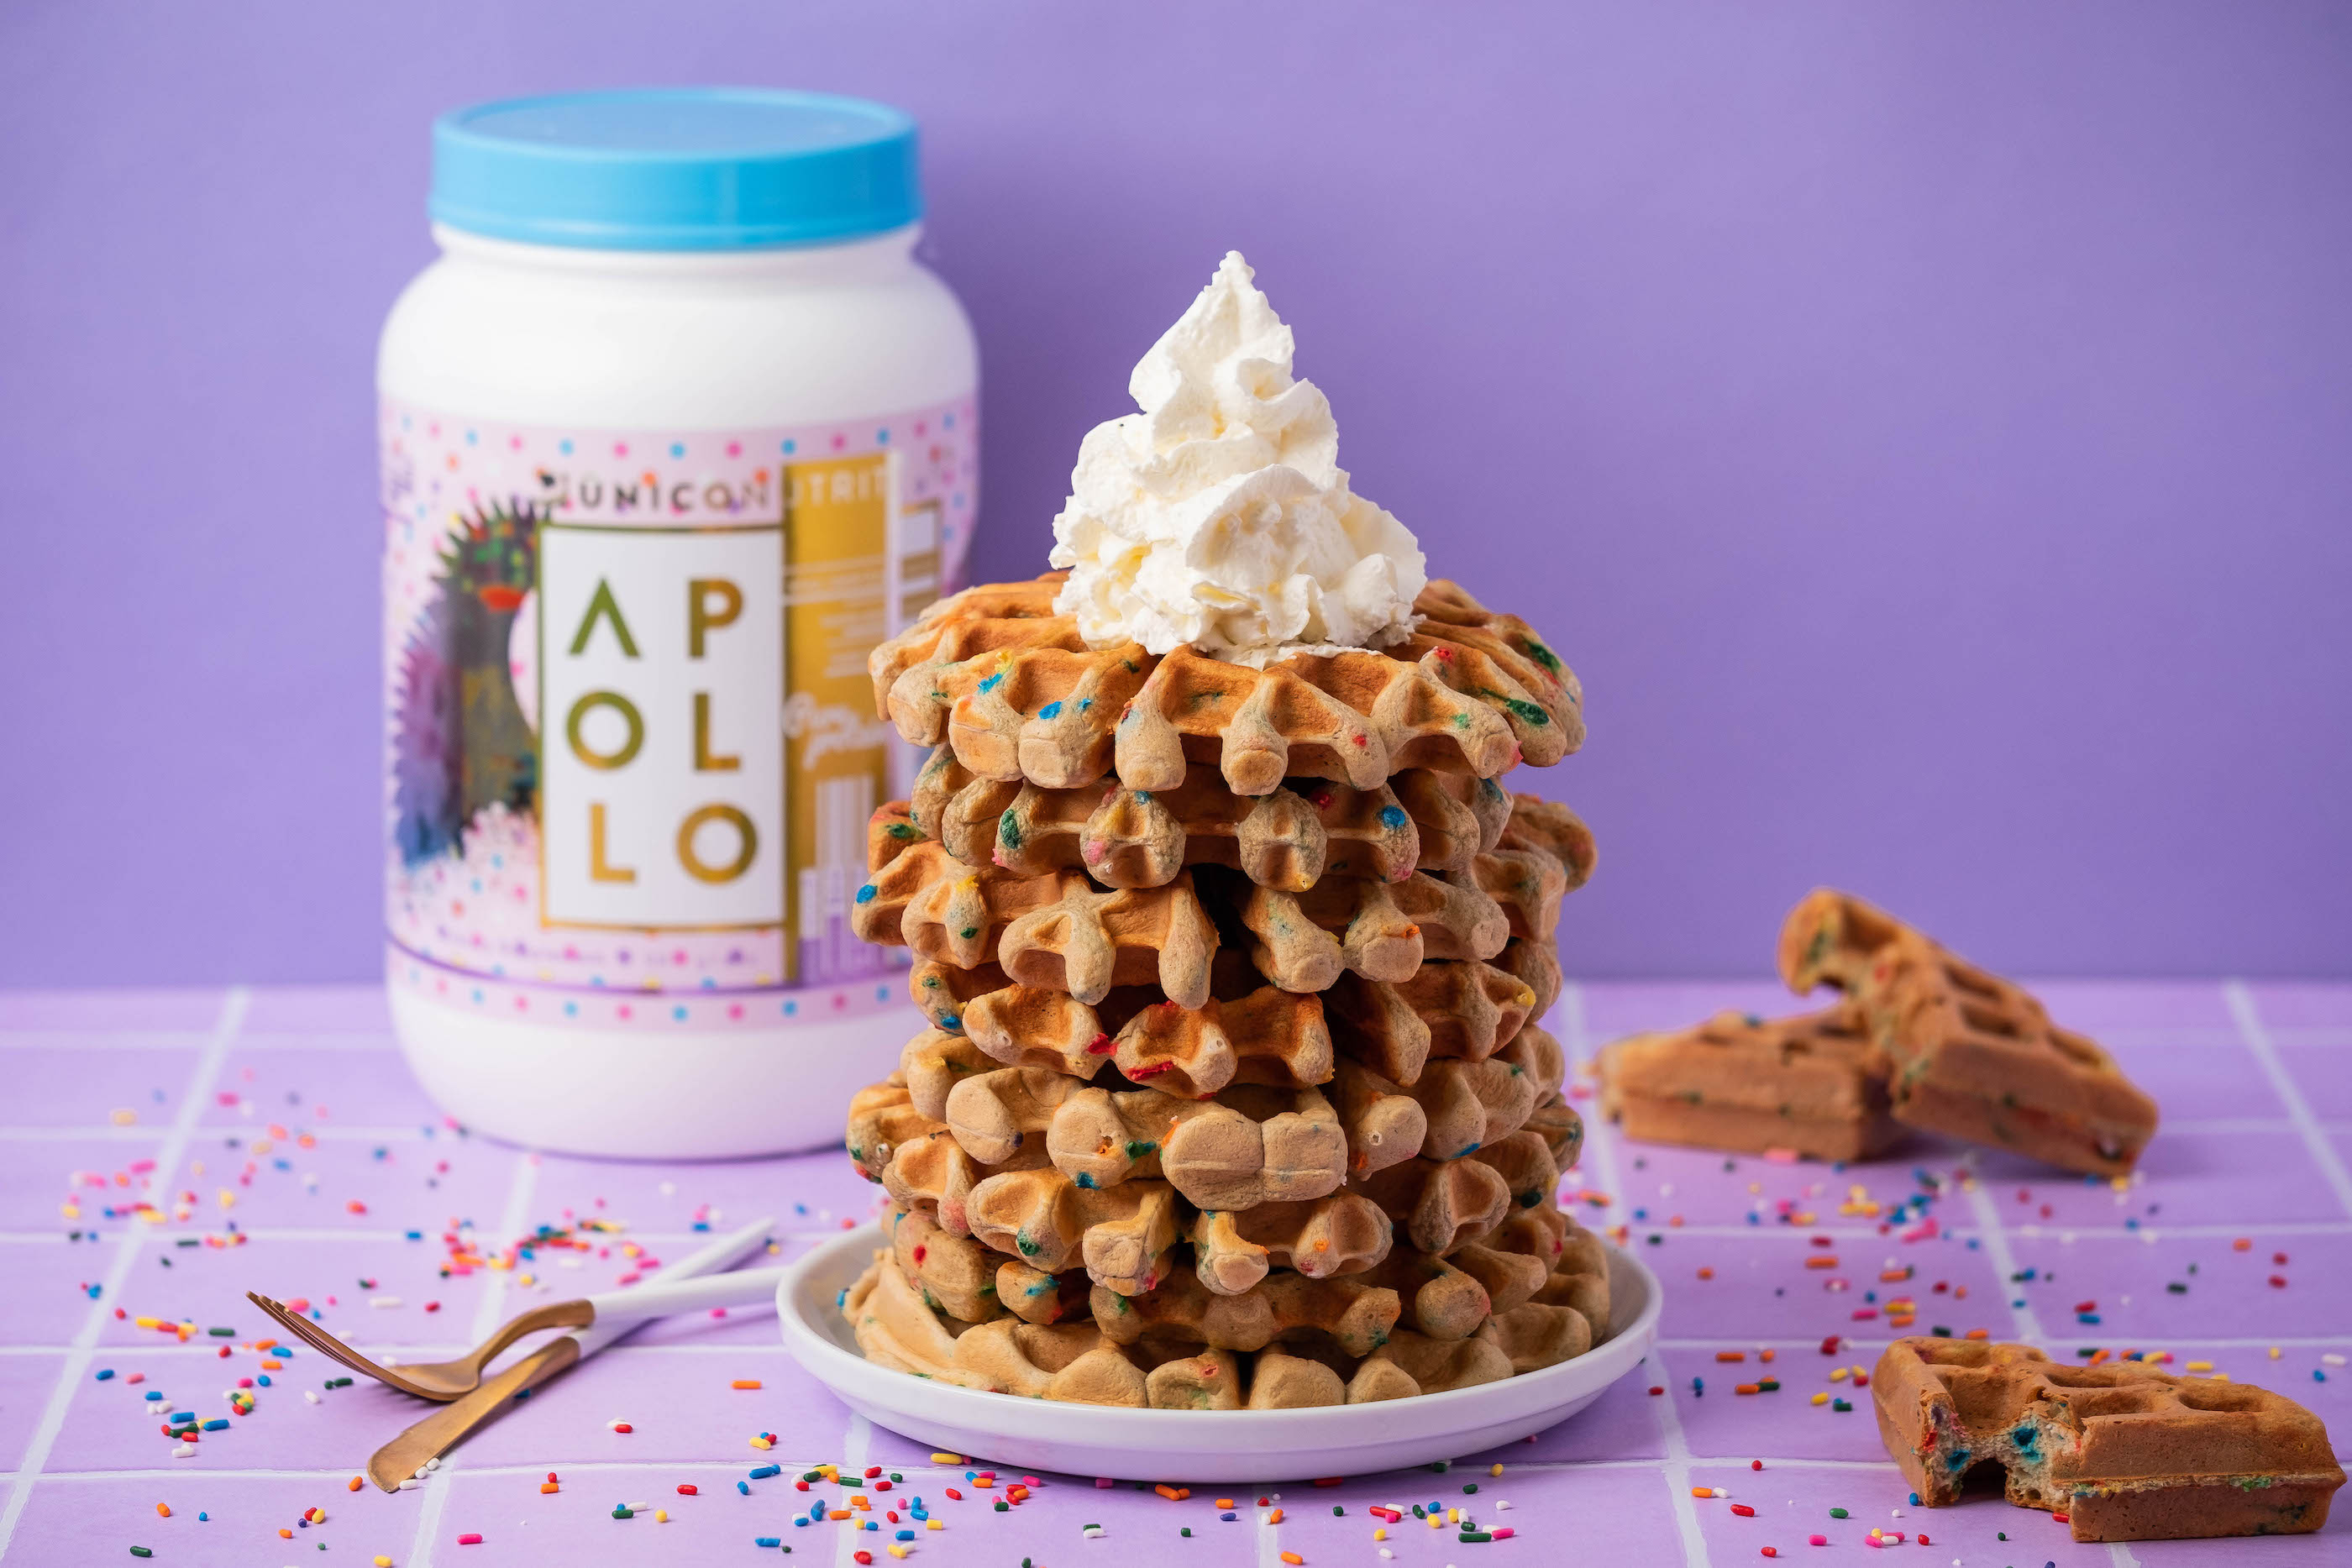 A stack of protein waffles made with birthday cake protein powder, with protein powder jar in background. Abstract purple scenery.